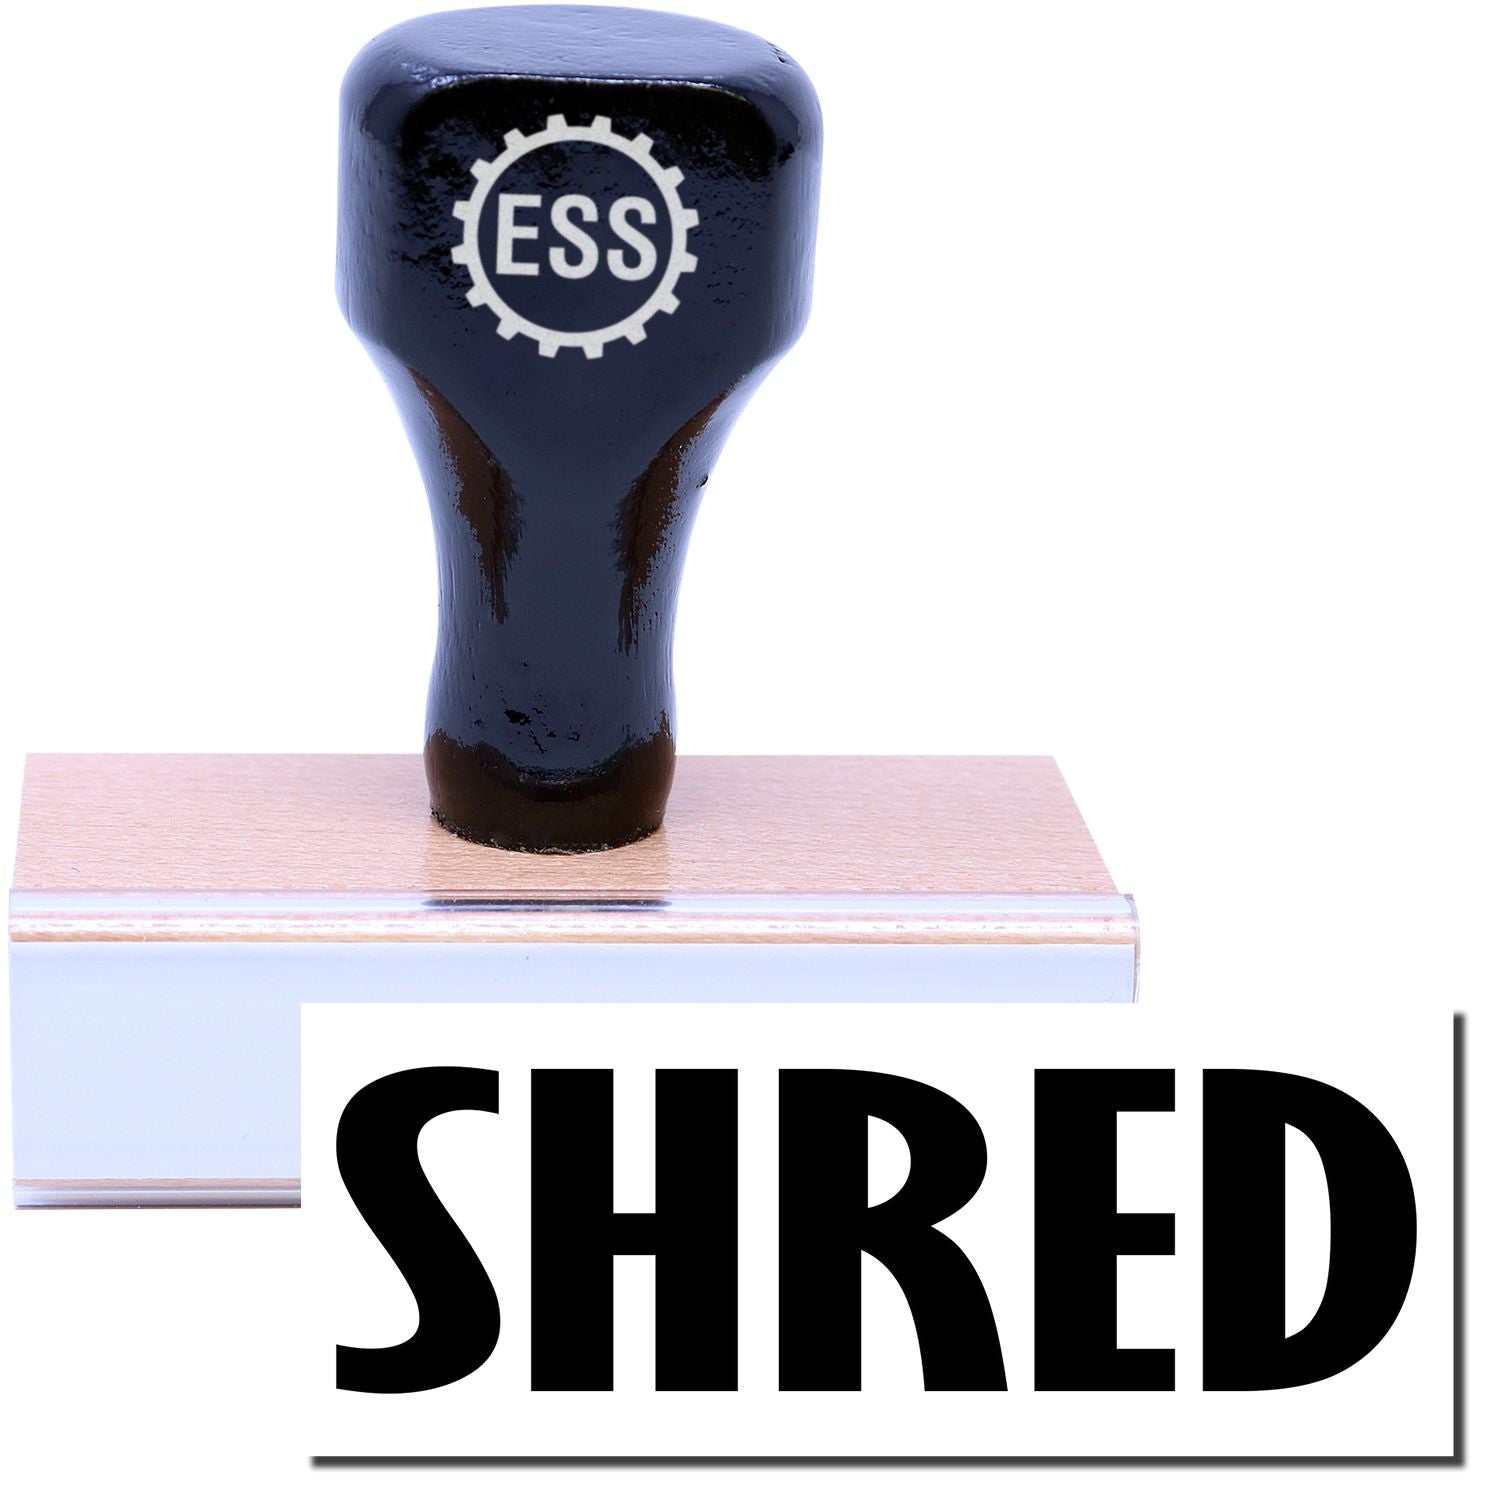 A stock office rubber stamp with a stamped image showing how the text "SHRED" in a large font is displayed after stamping.